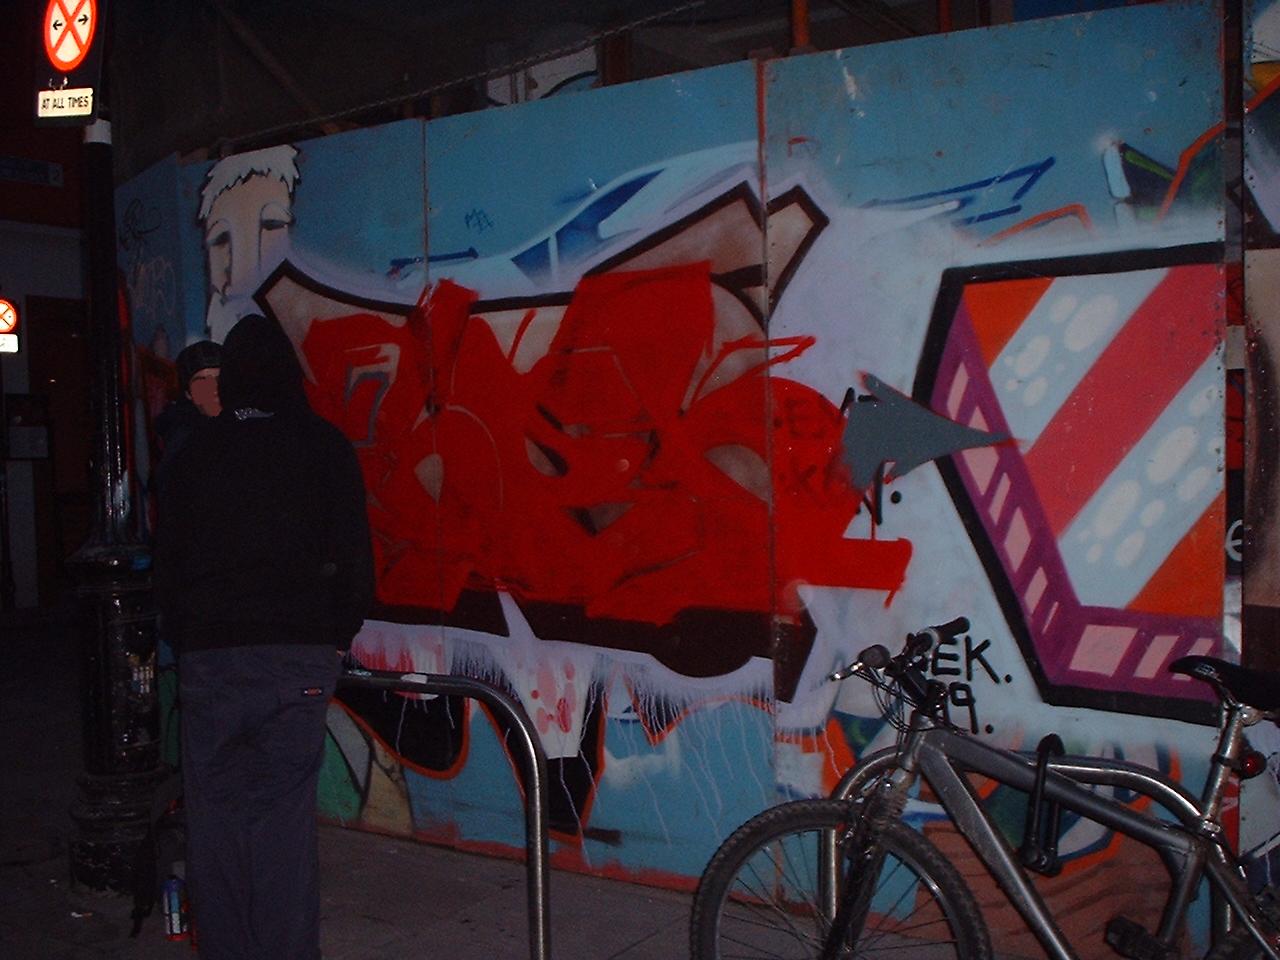 graffiti on the side of the wall depicts two men, one looking at a bike